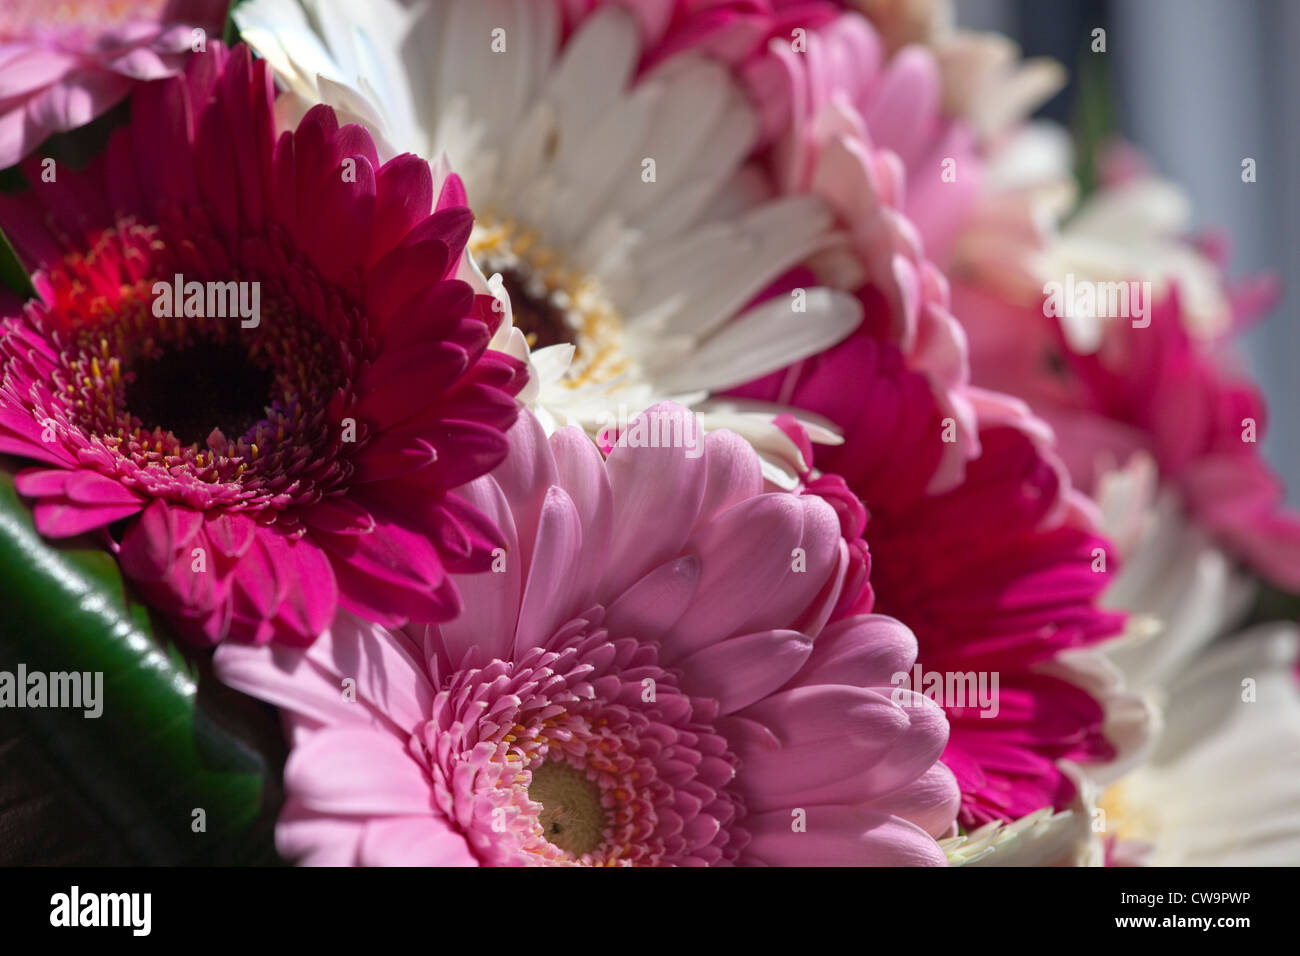 A floral bouquet in pink, red and white Stock Photo